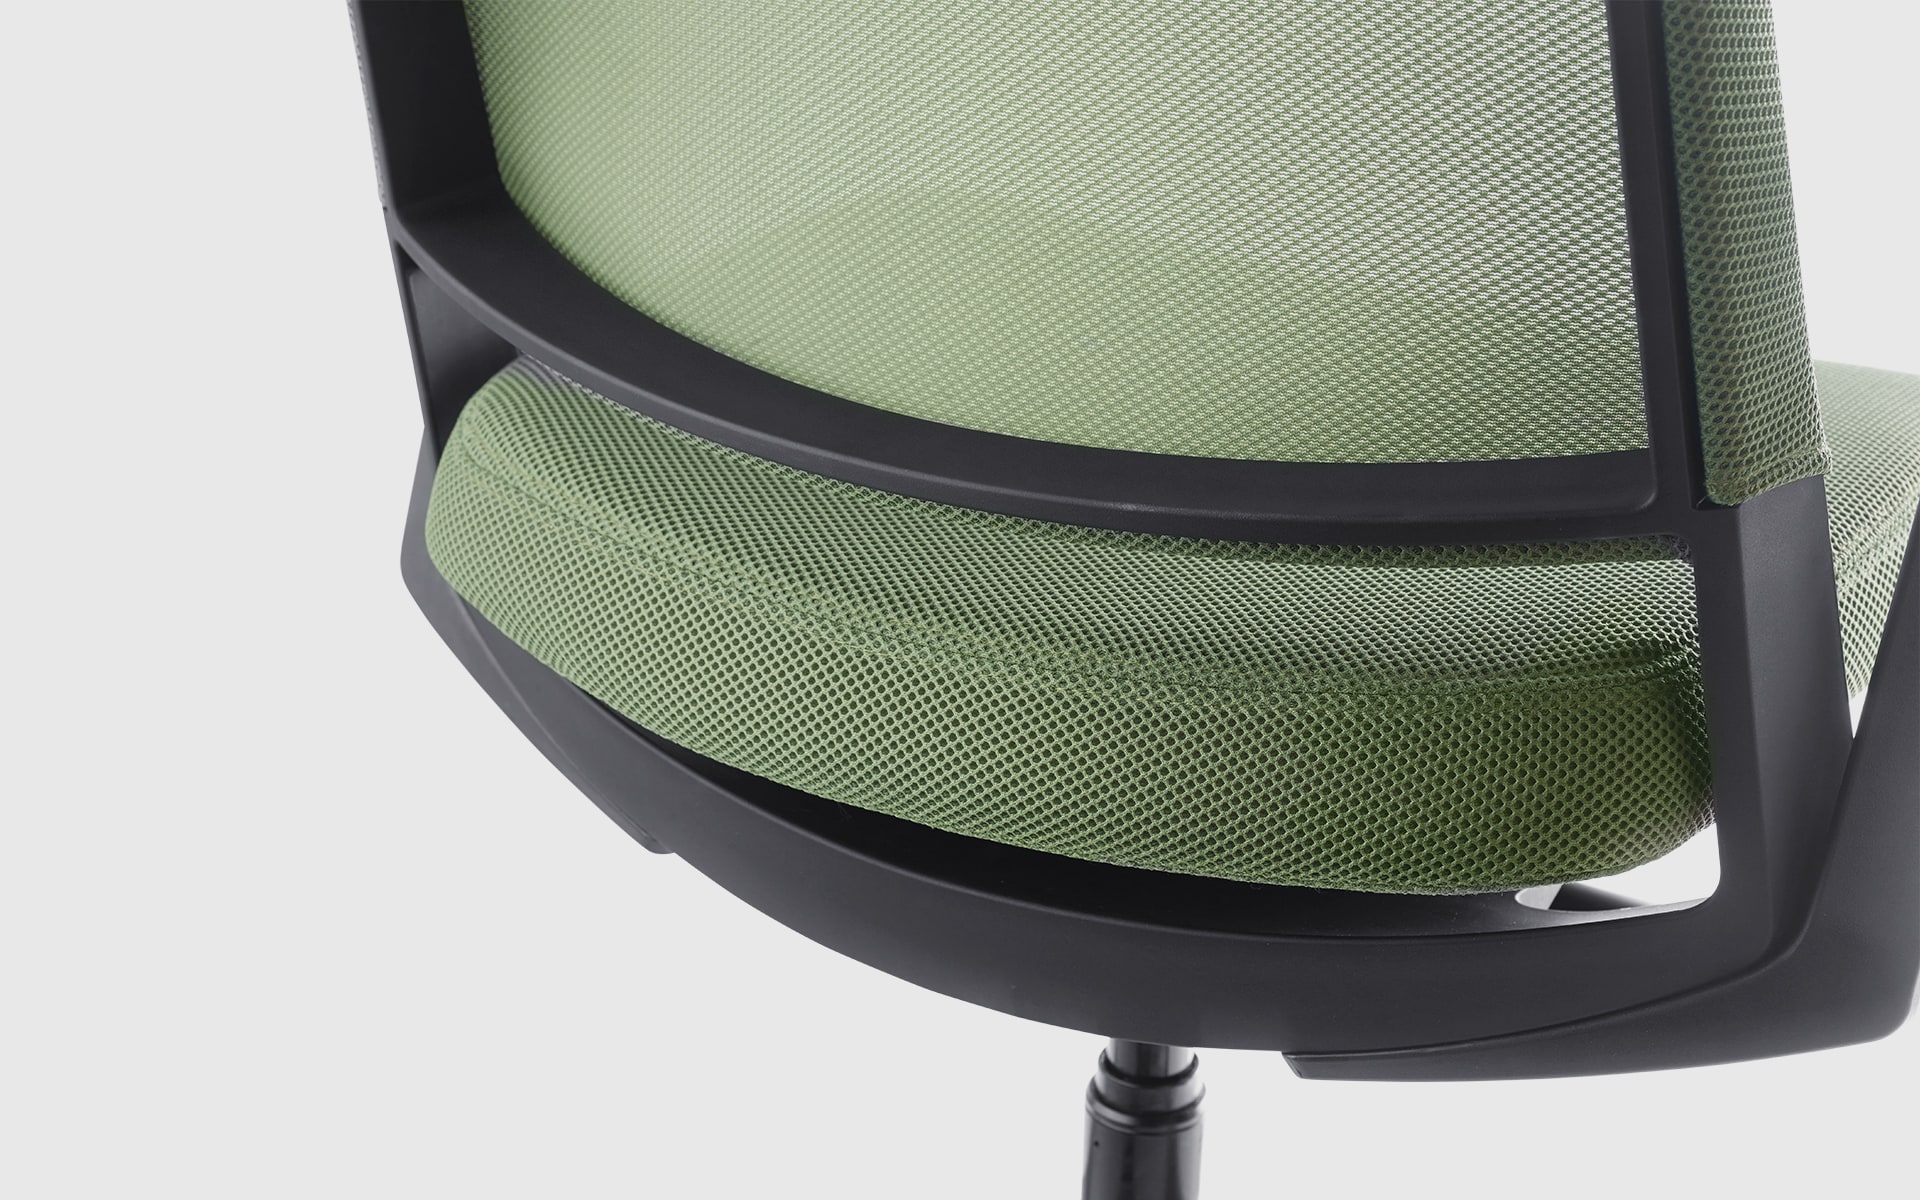 Close-up of the Forma 5 Kineo office chair by ITO Design with pale green mesh upholstery